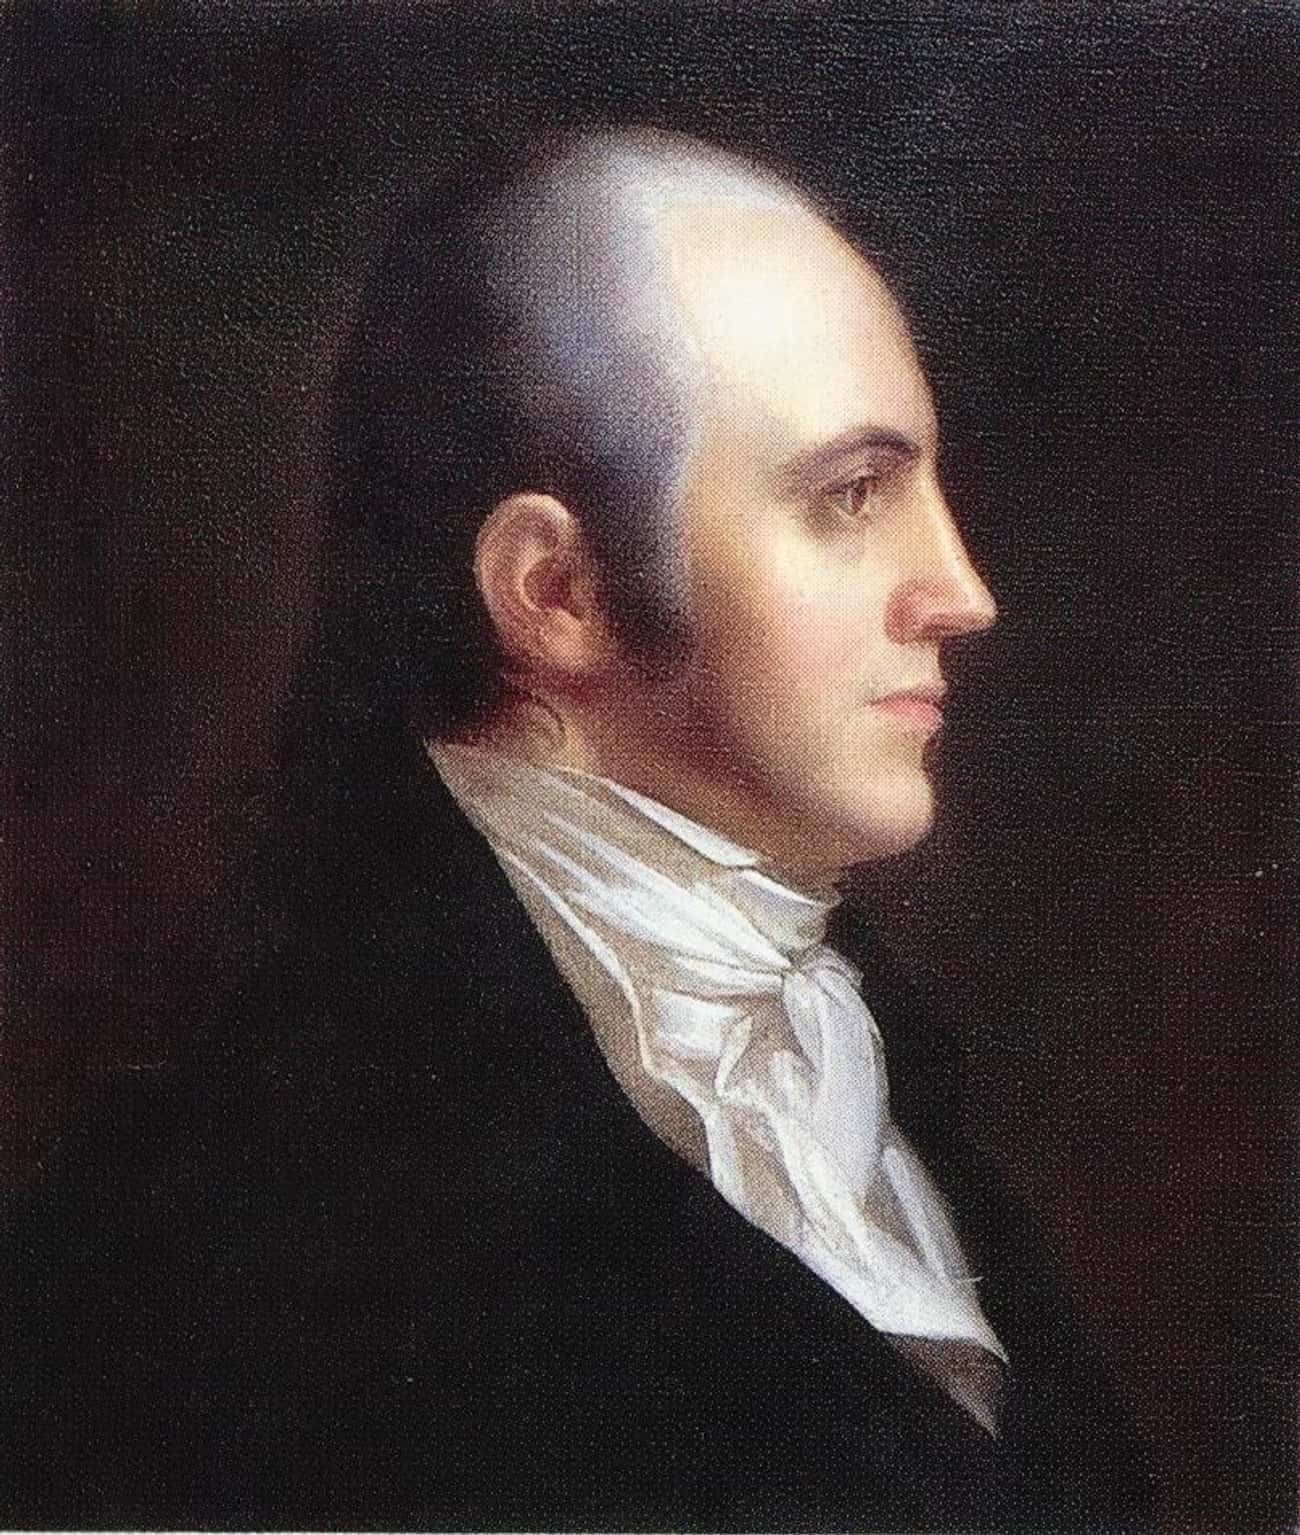 Aaron Burr Tried To Form His Own Country And Was Tried For Treason